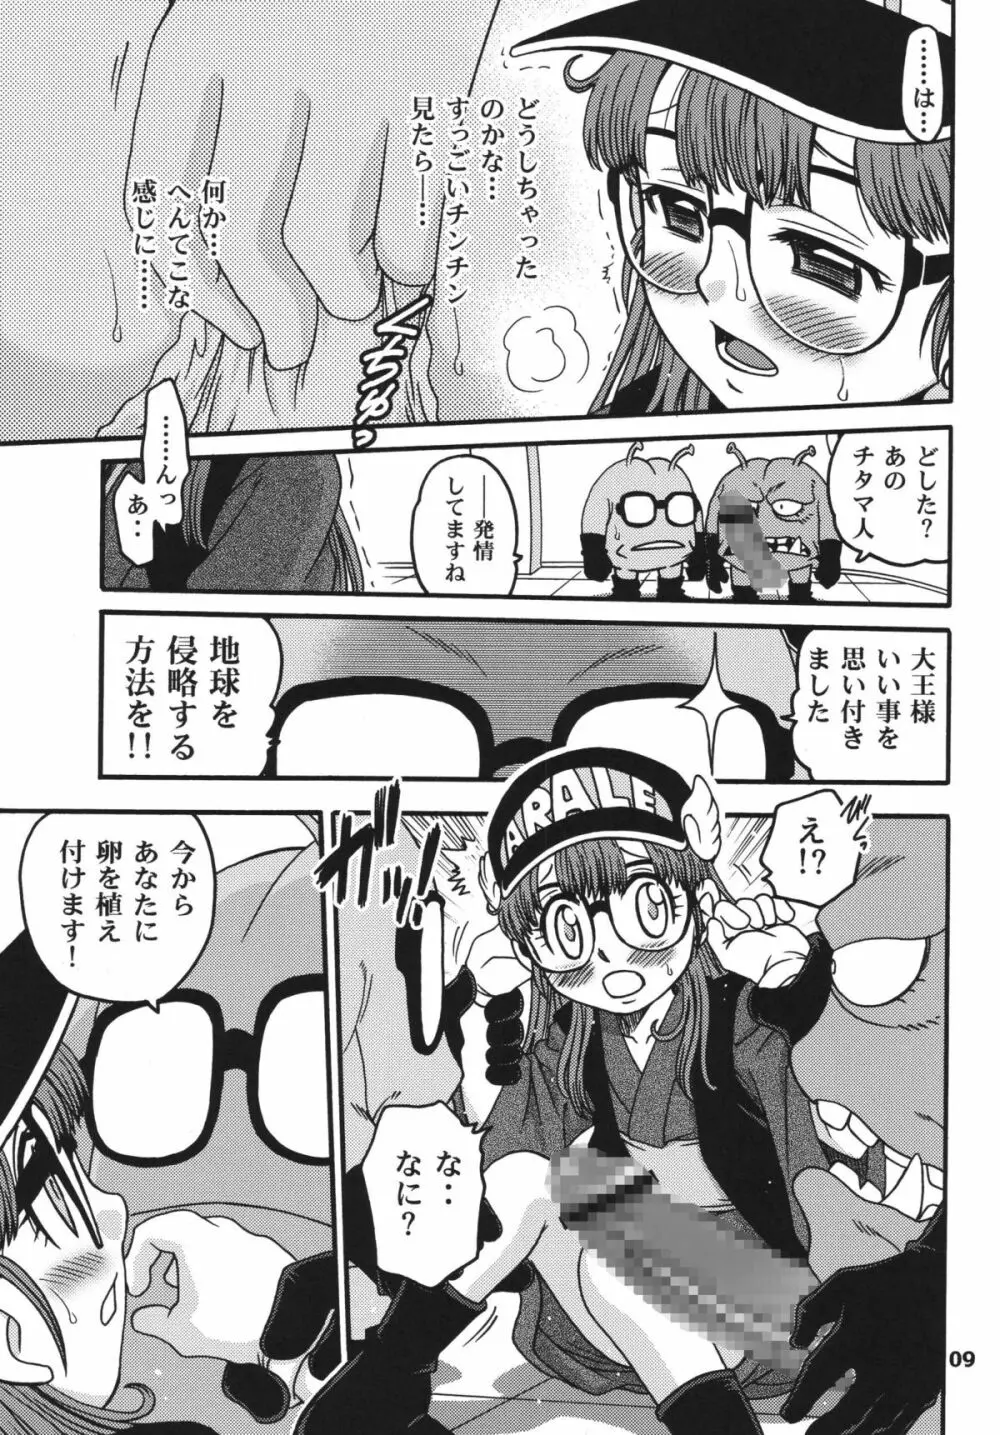 PROJECT ARALE 2 - page9